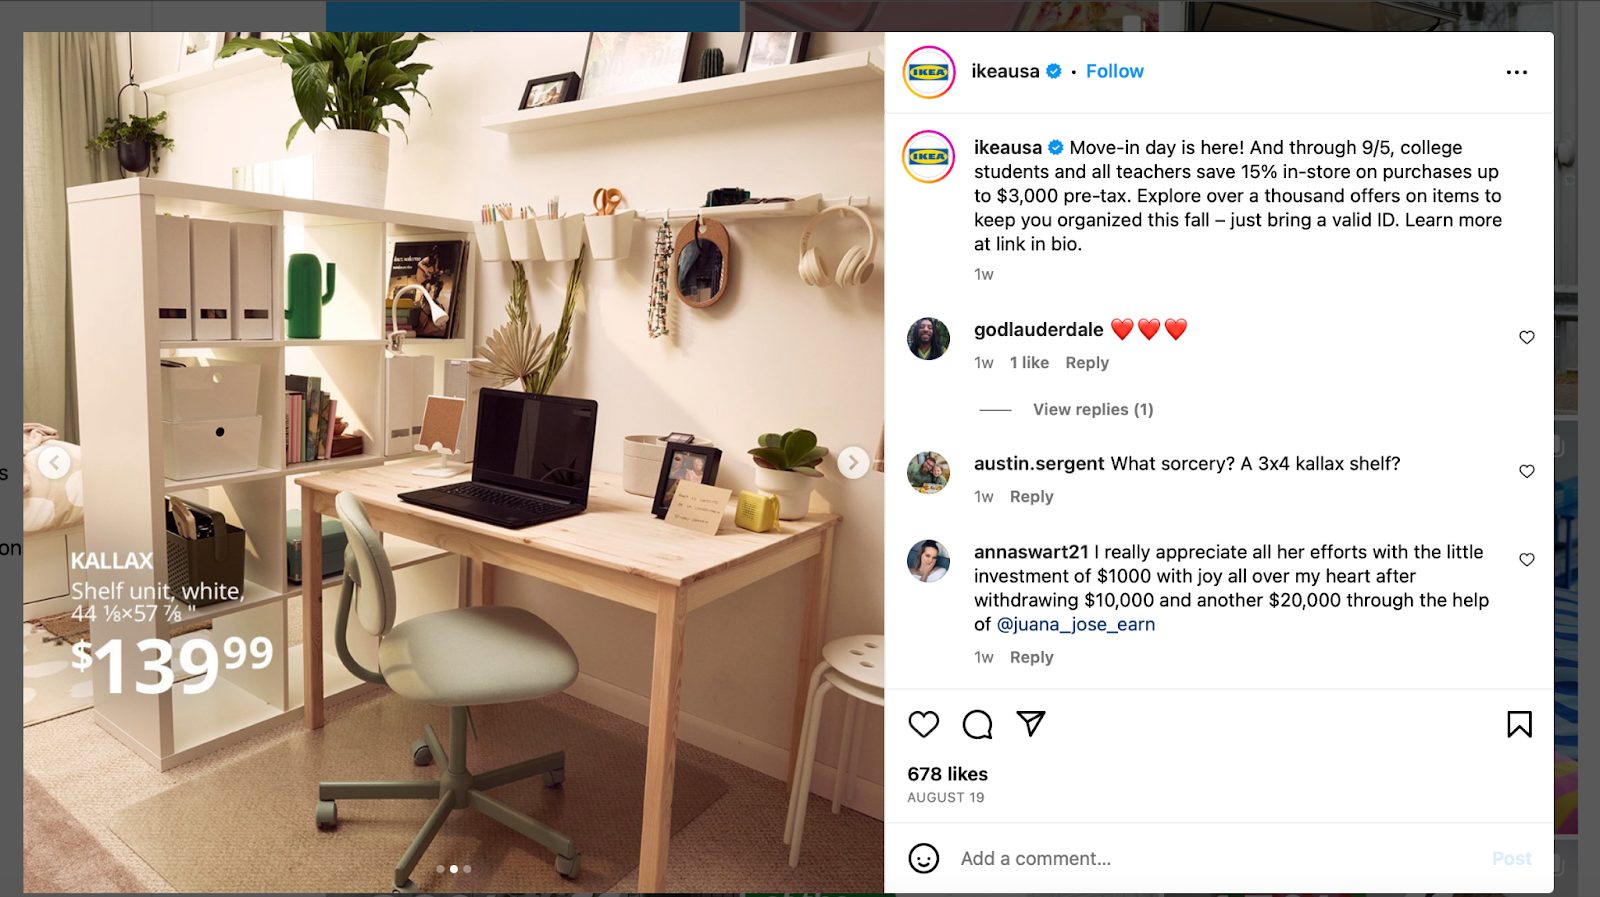 Ikea USA shares images from its digital catalog on Instagram to drive more attention